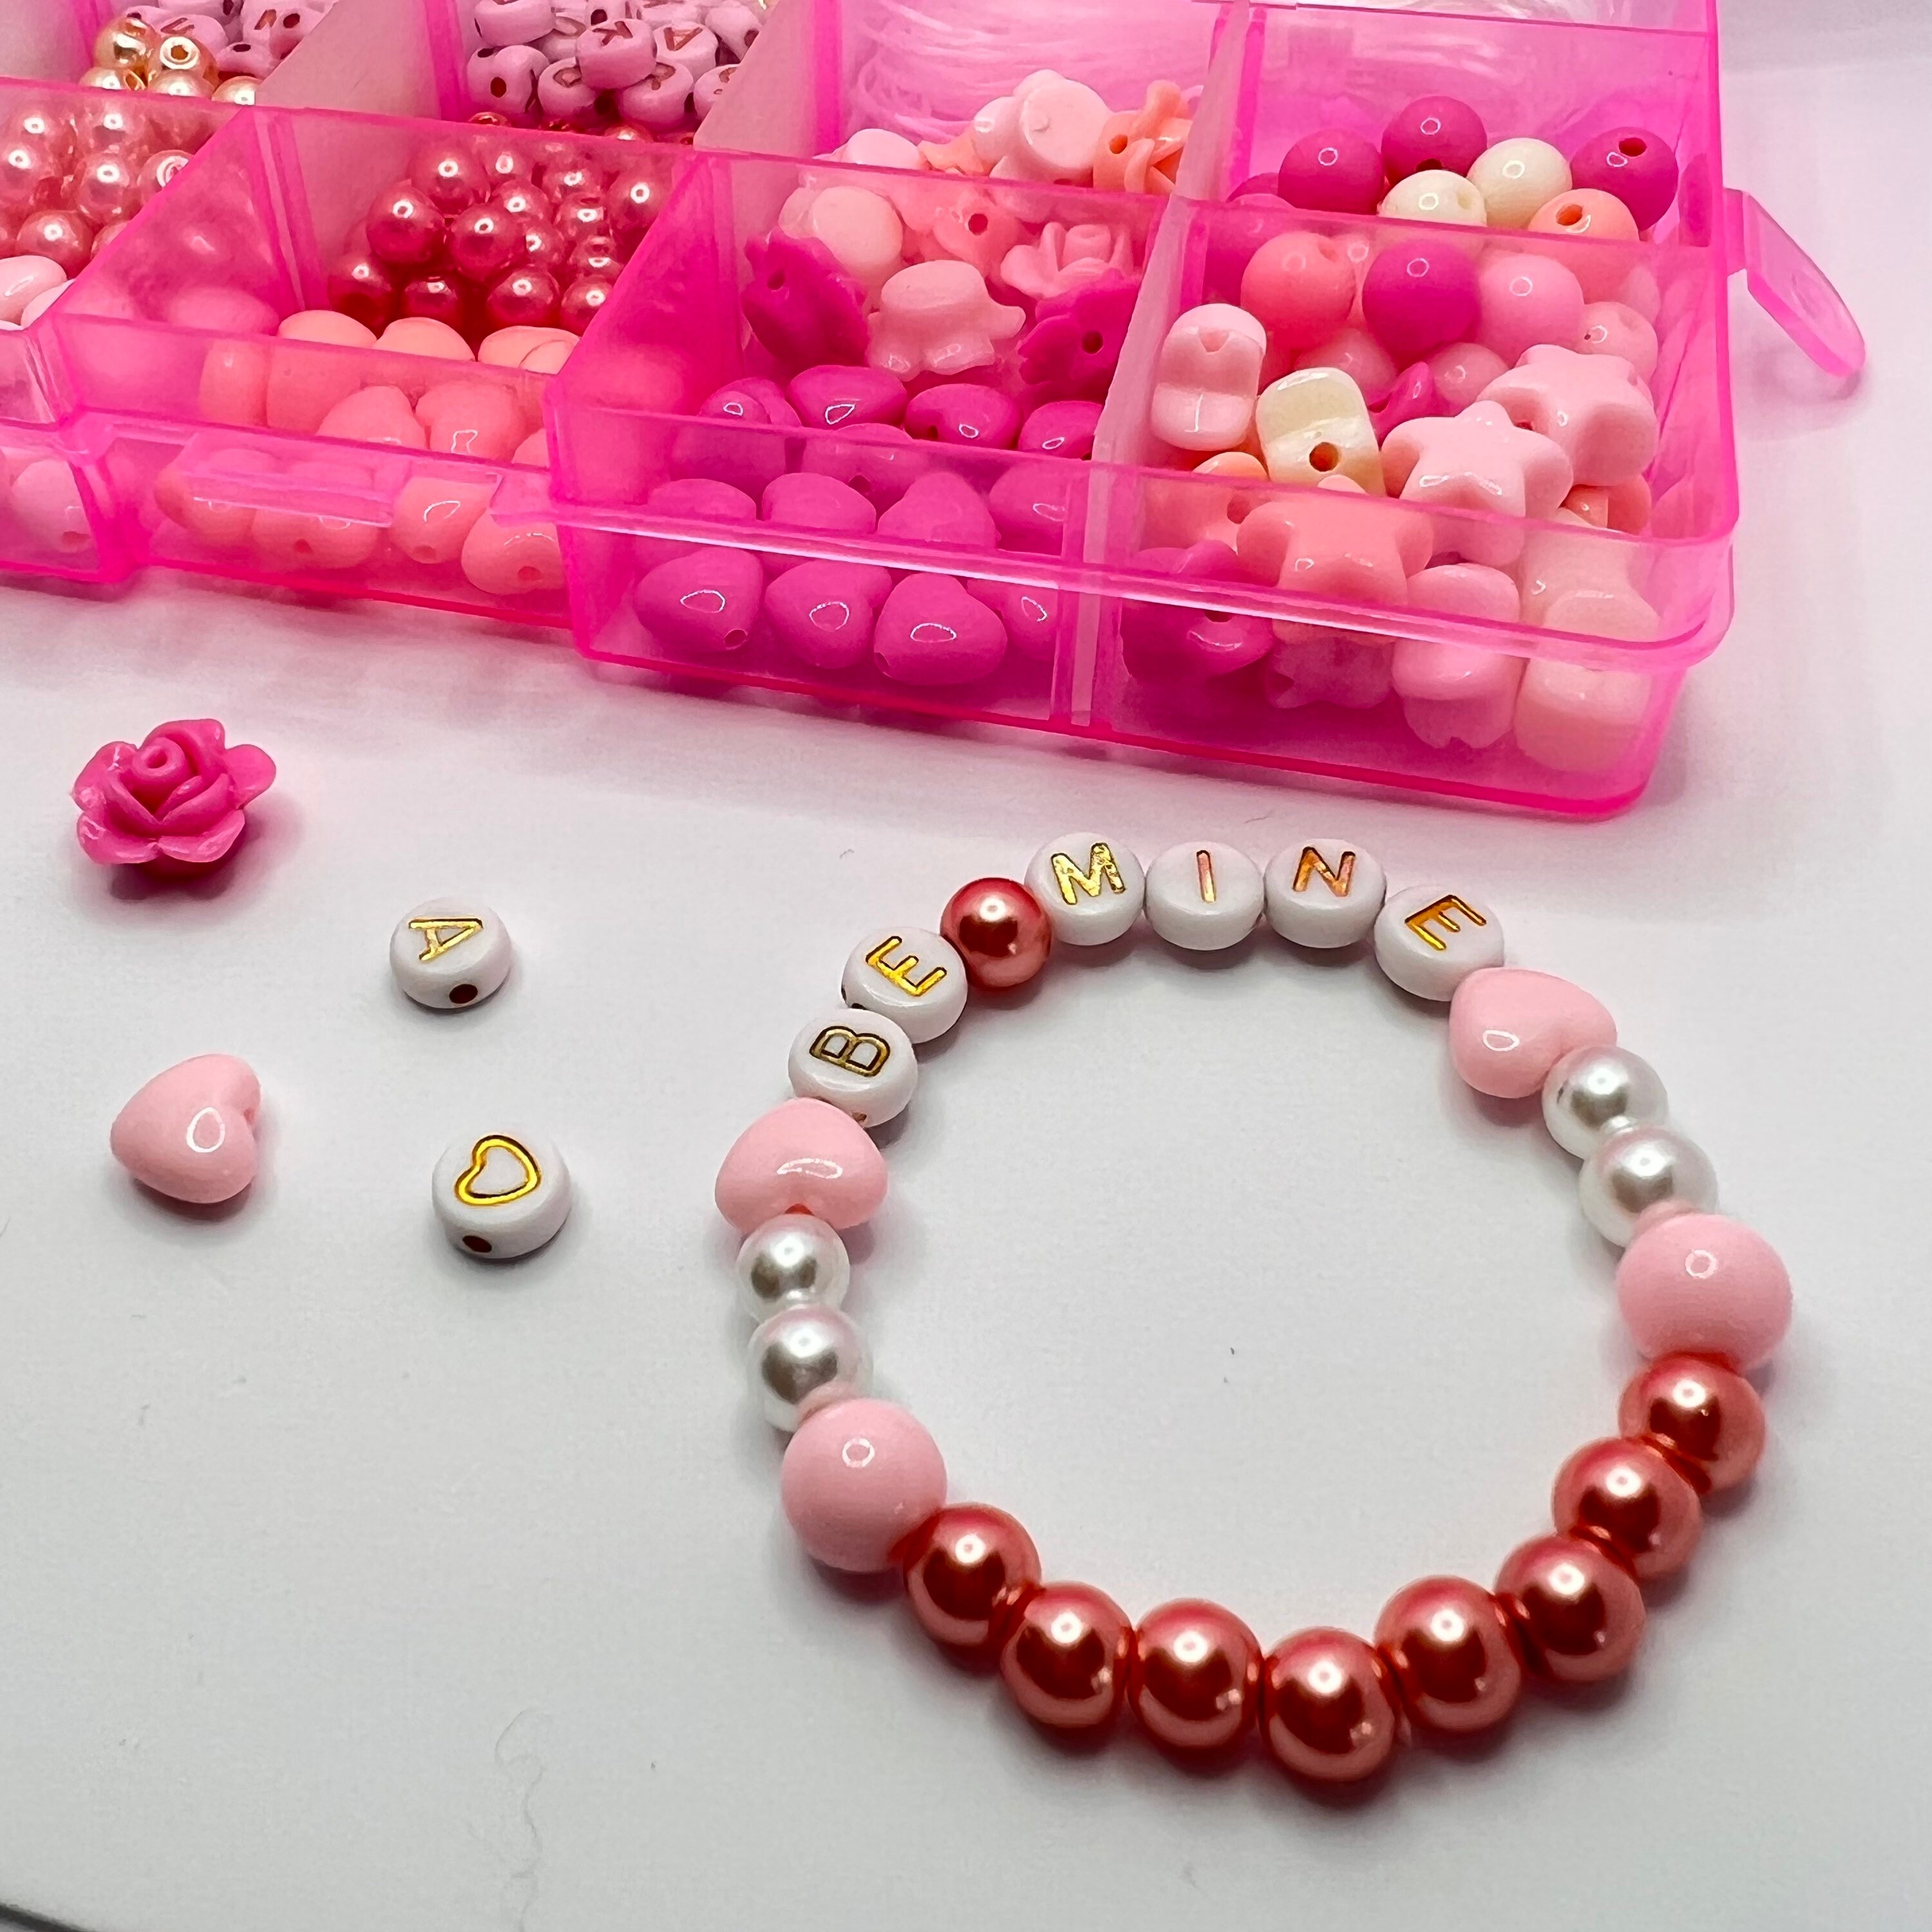 92 PCS DIY Charm Bracelet Necklaces Jewelry Making Kit with Pink Gift Box  for Girls Women Valentines Birthday Christmas Gift - Realistic Reborn Dolls  for Sale